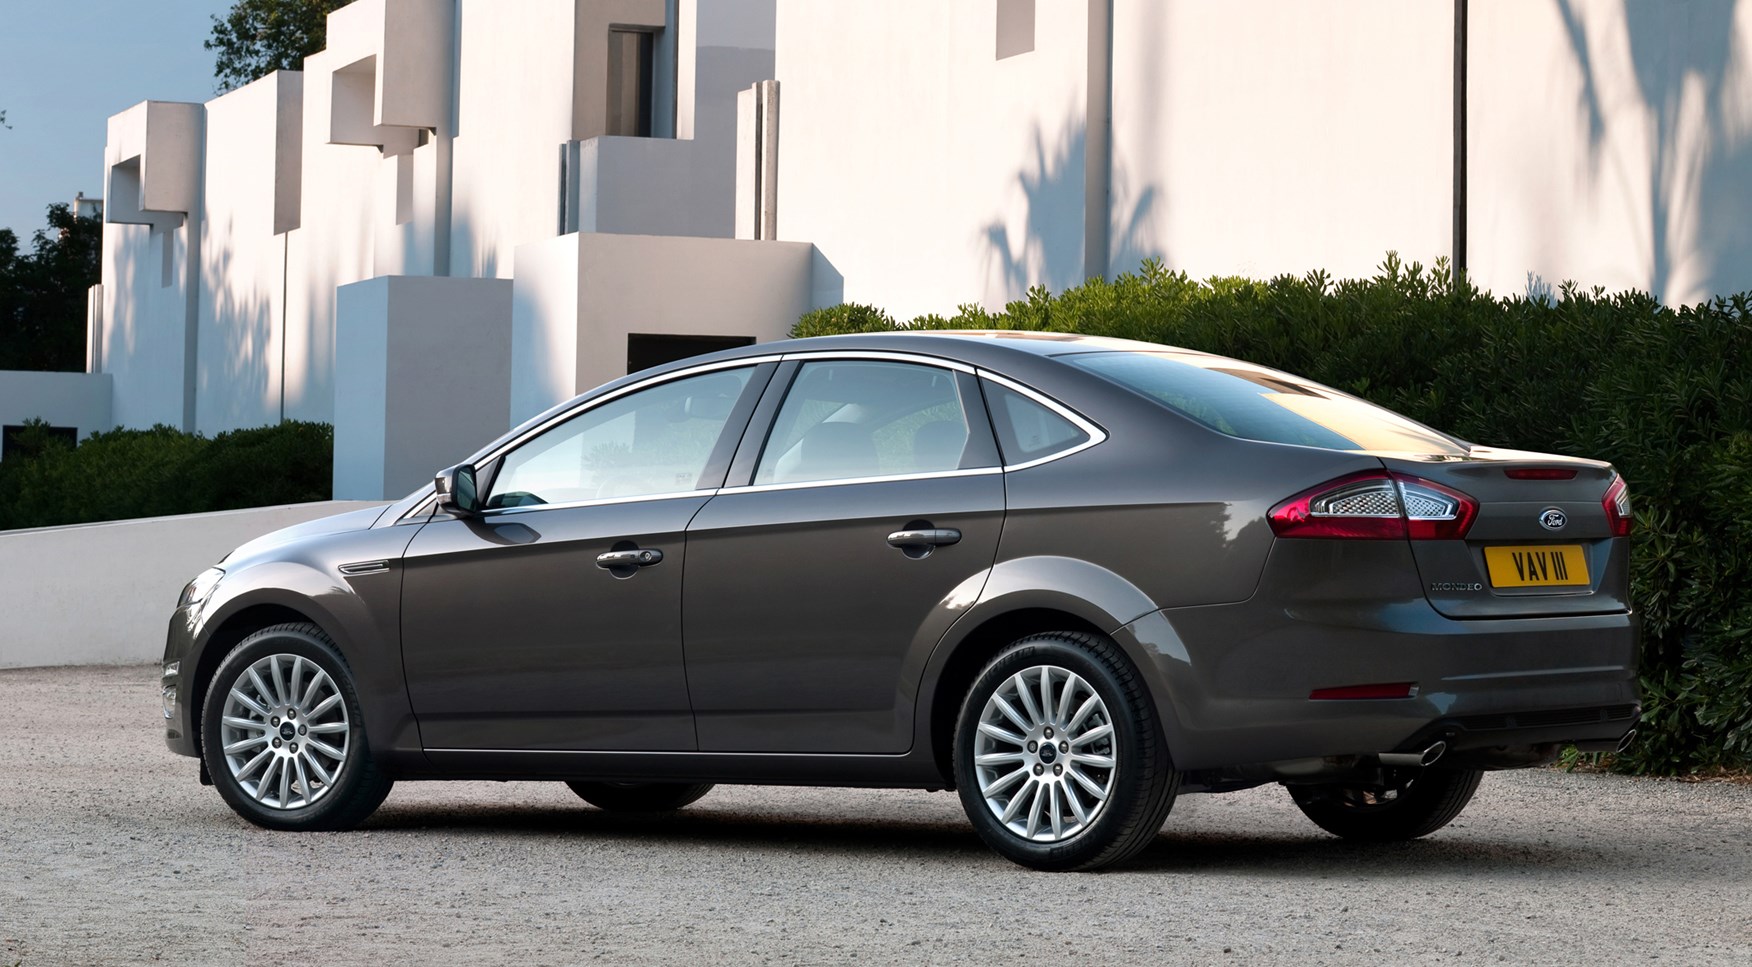 Used Ford Mondeo Saloon (2007 - 2010) Review | Parkers